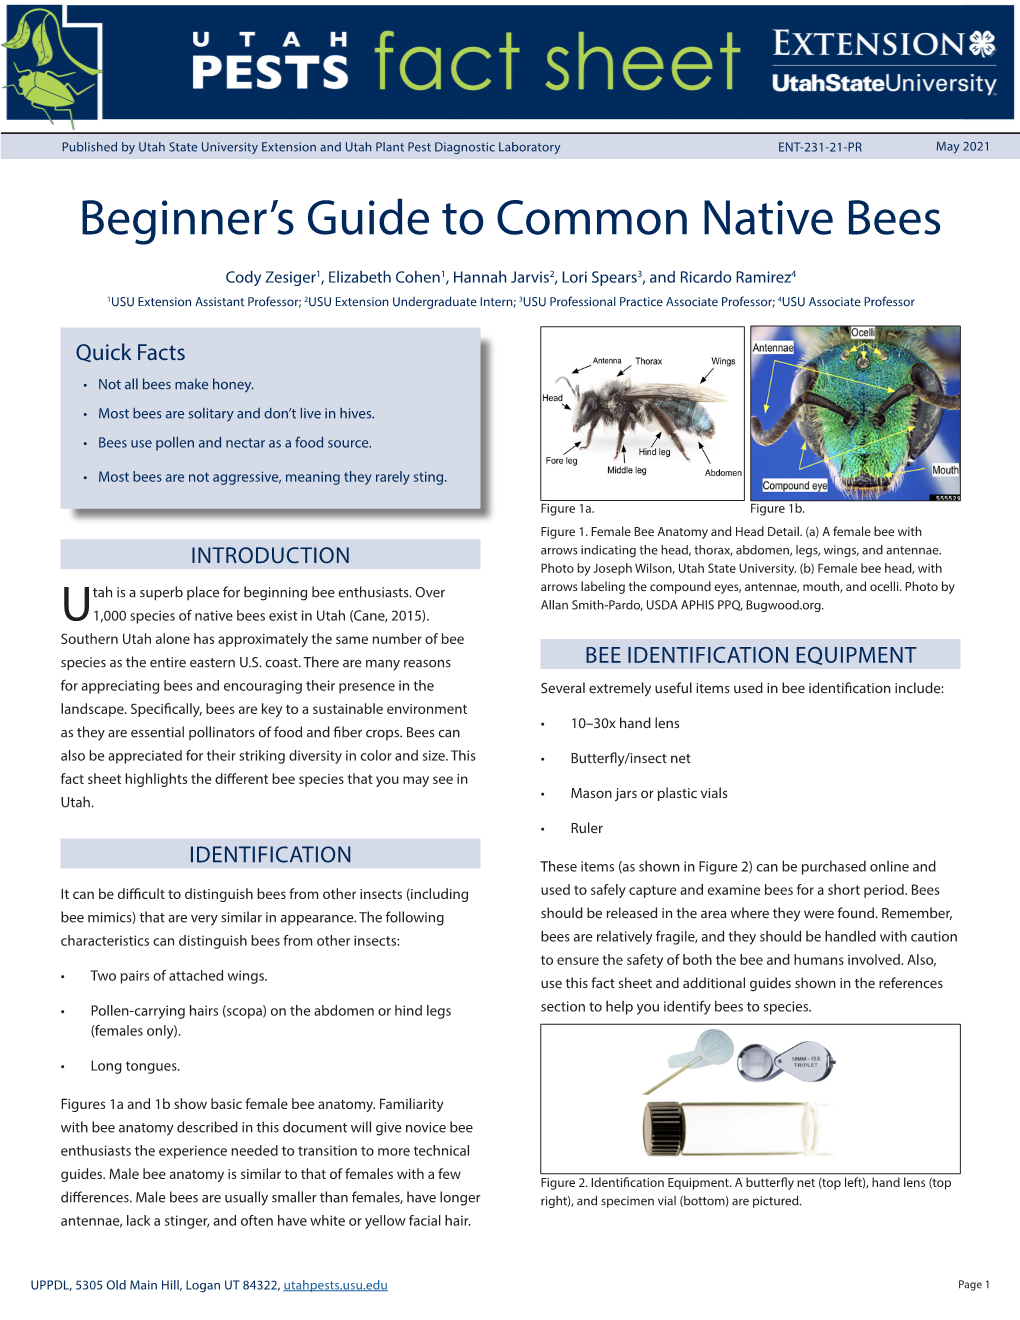 Beginner's Guide to Common Native Bees